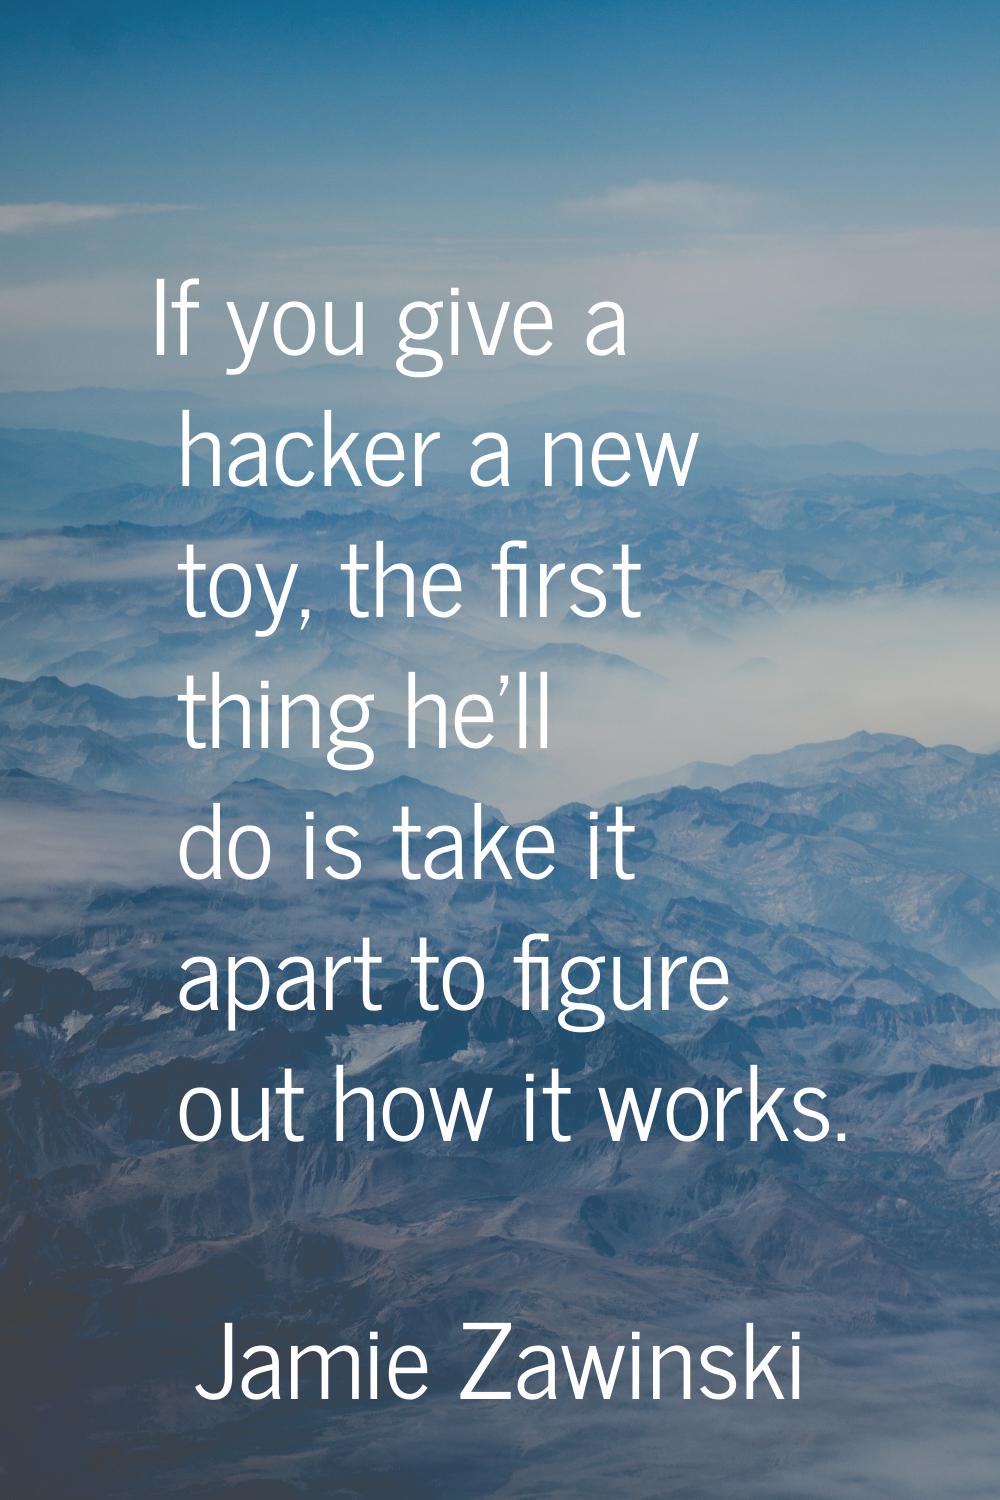 If you give a hacker a new toy, the first thing he'll do is take it apart to figure out how it work